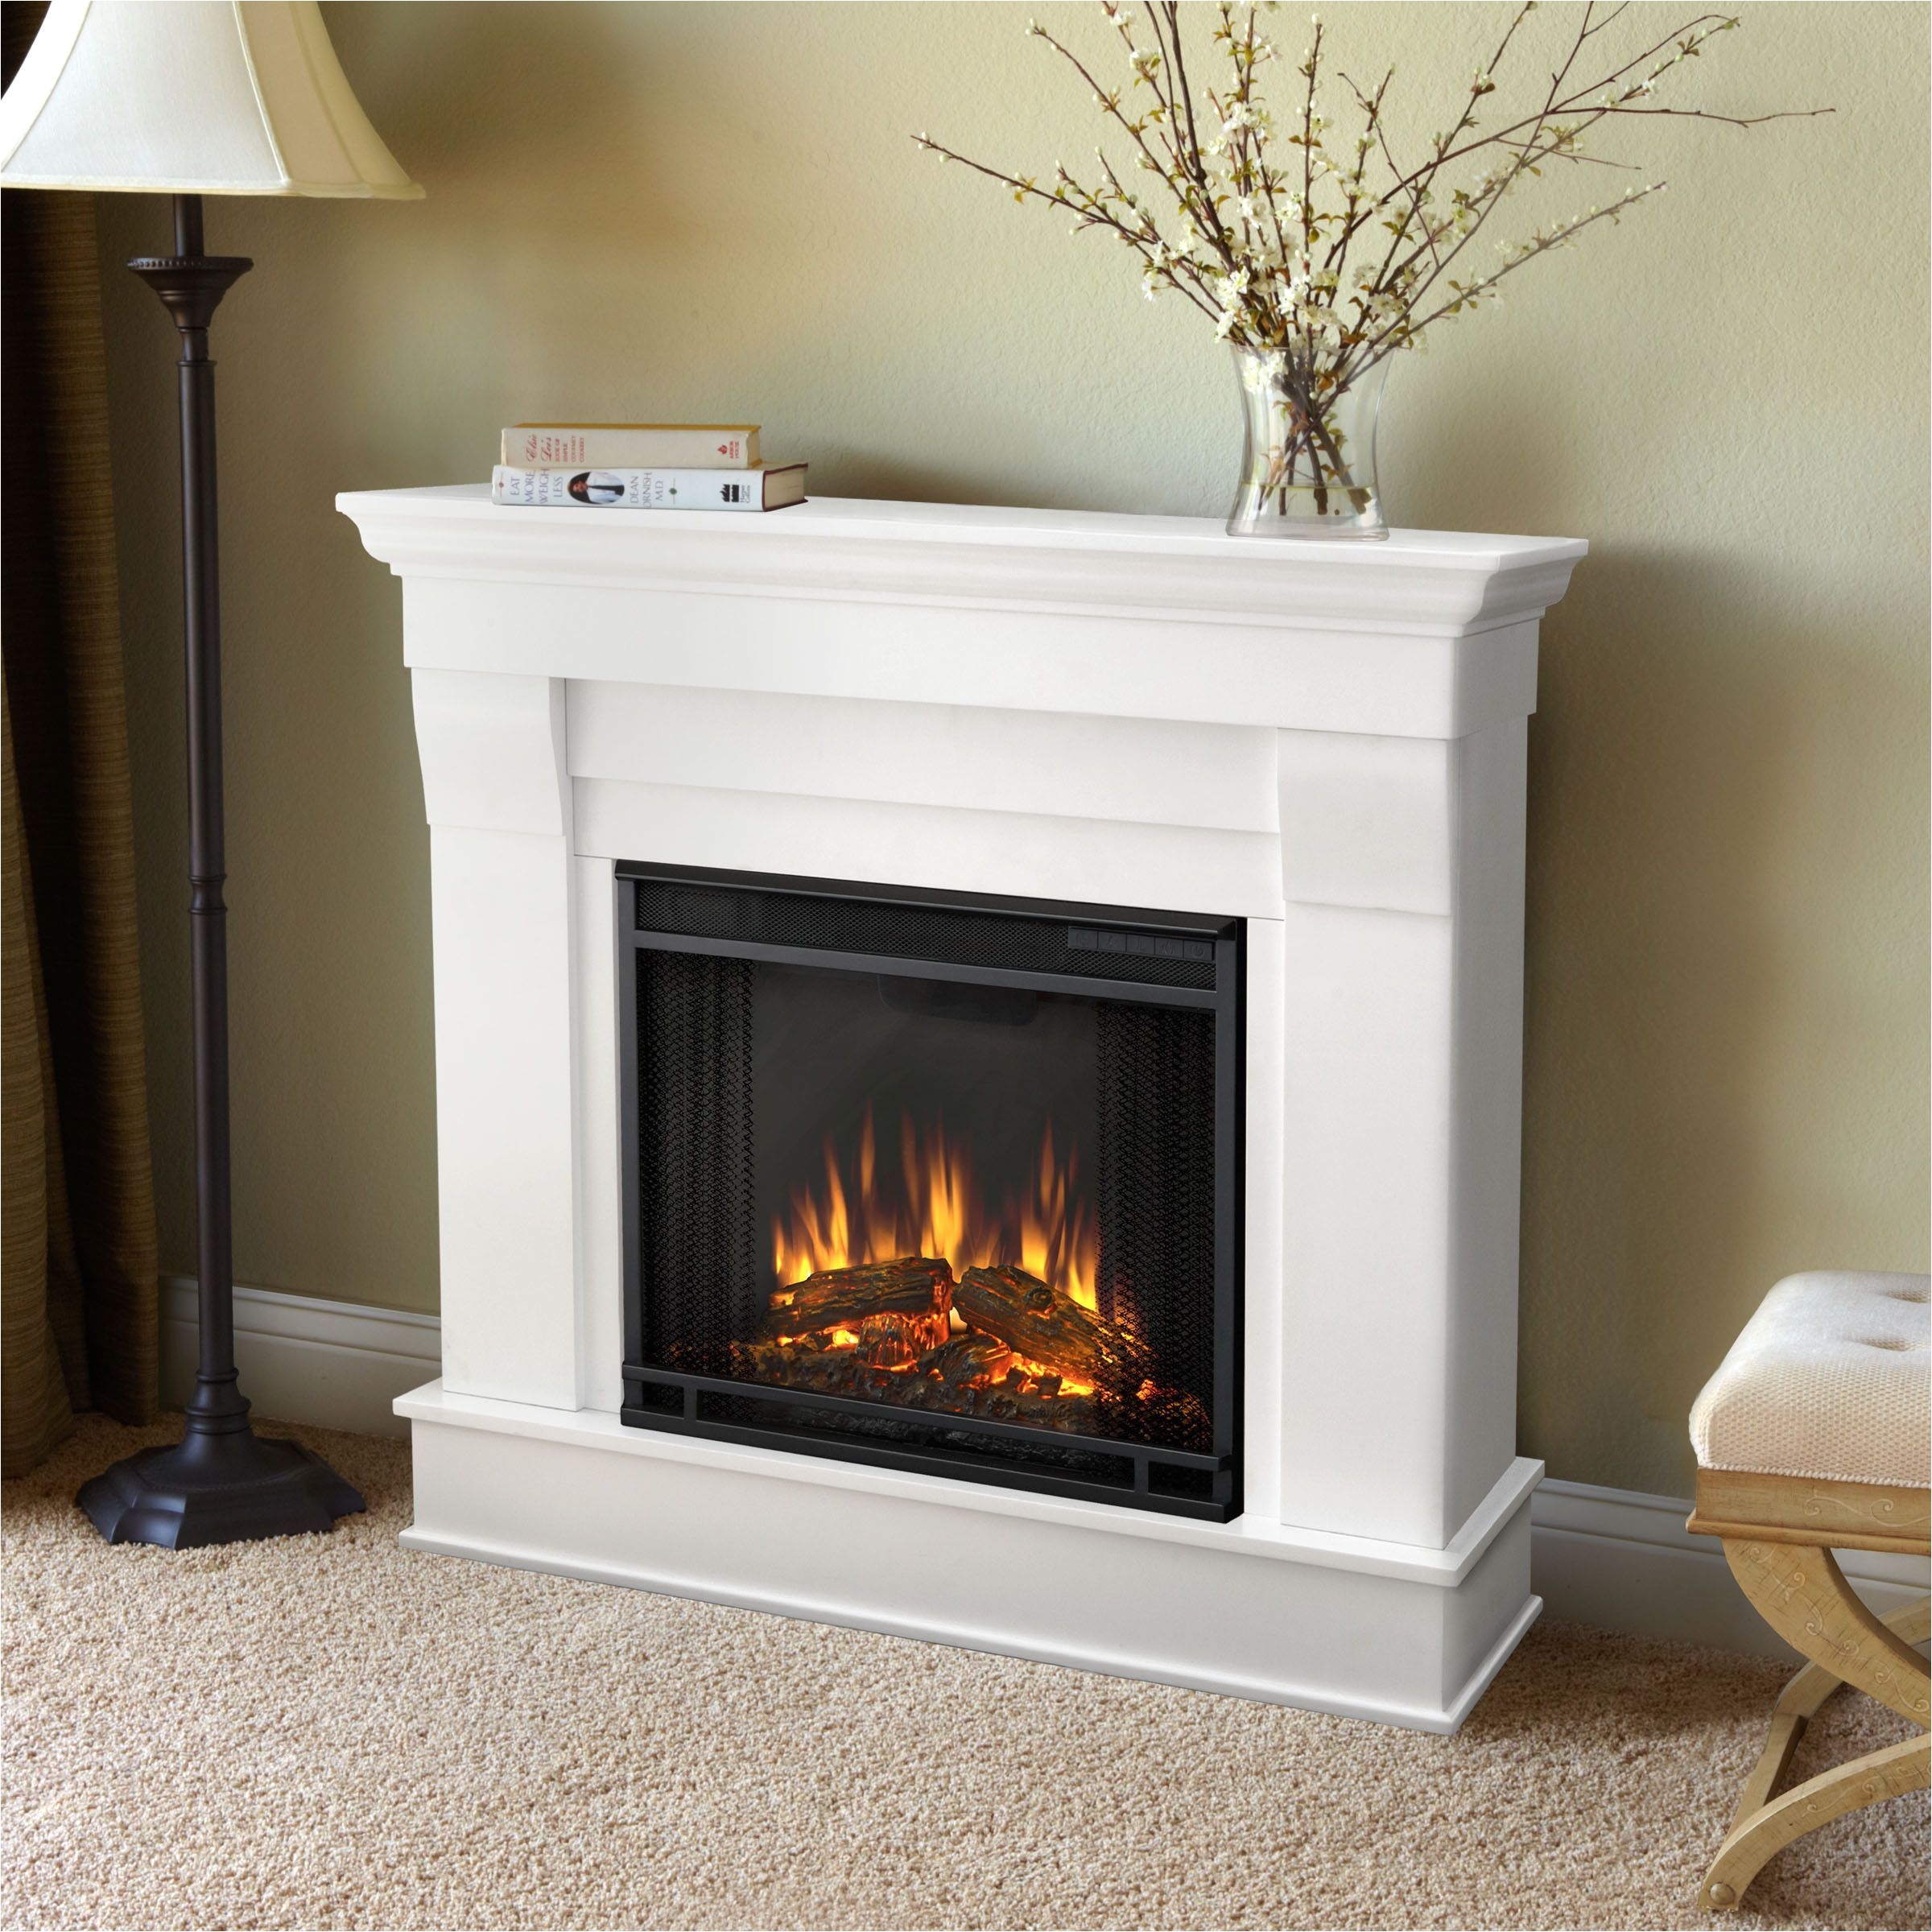 Fake Gas Fireplace Fresh Fake Fire Picture for Fireplace Real Flame Chateau Electric